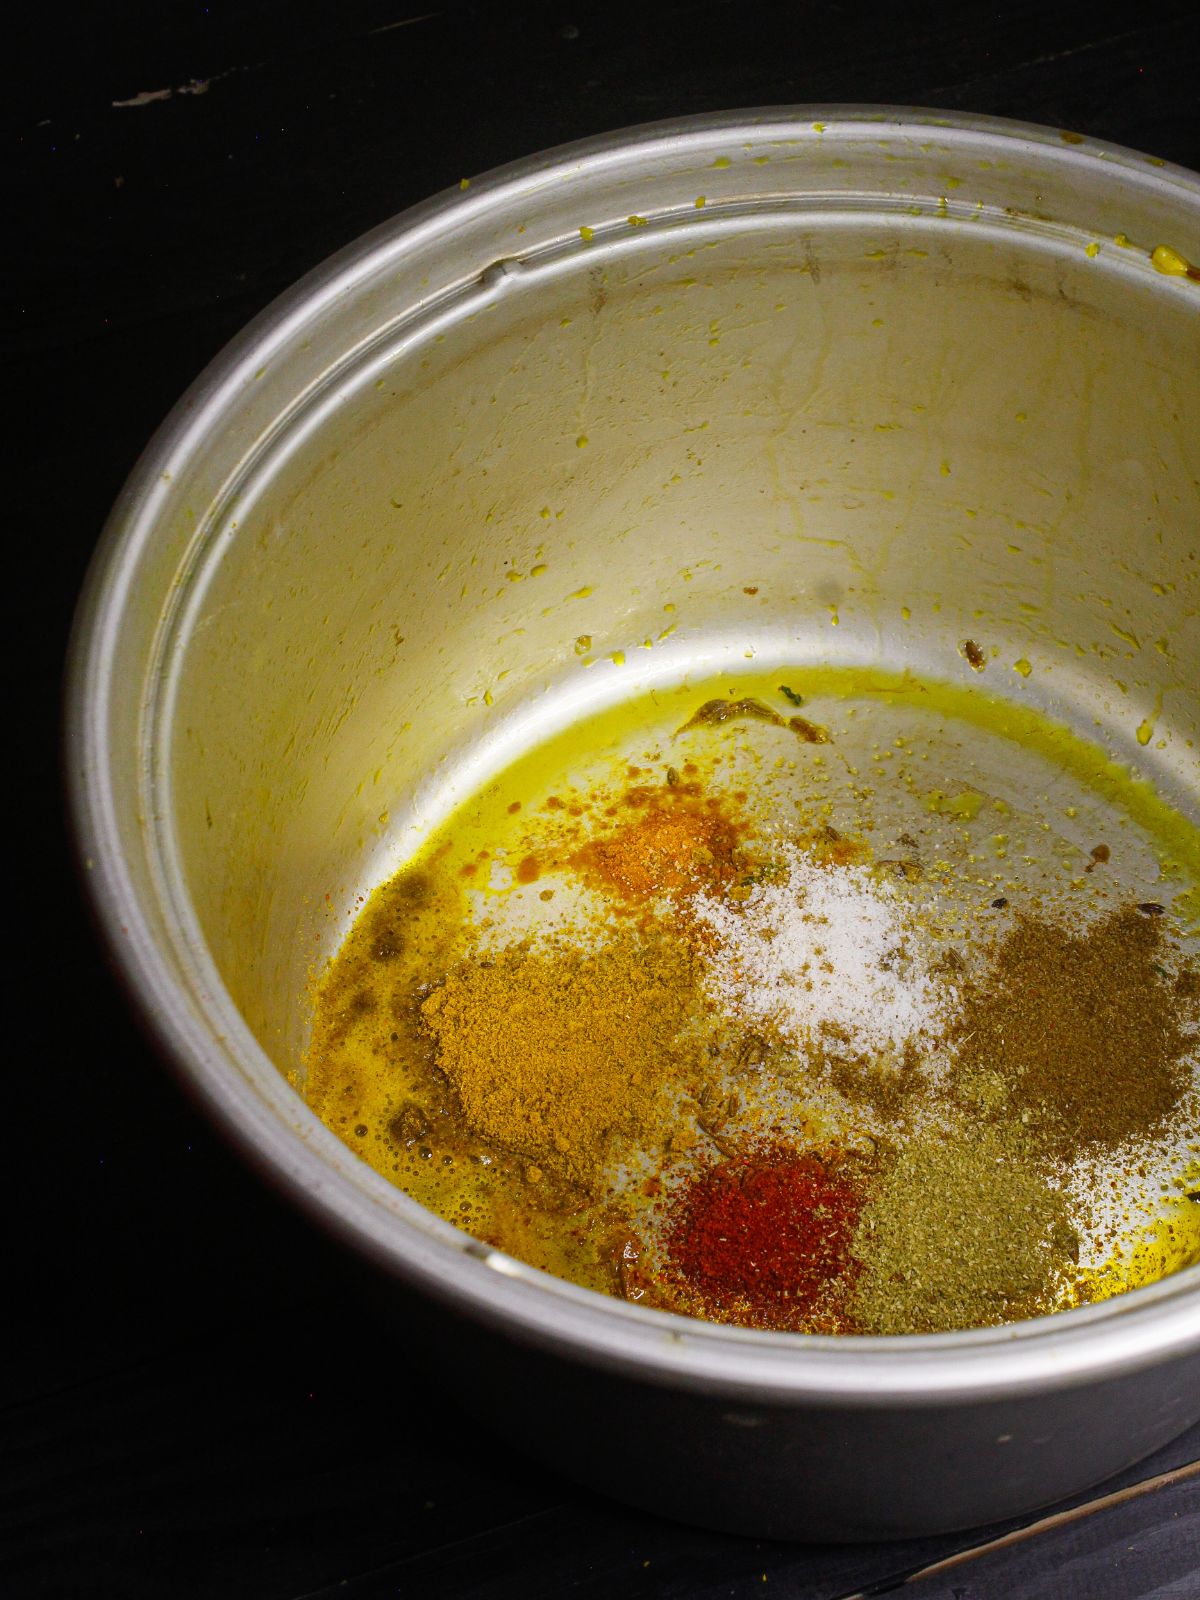 Add all the powdered spices to the pot 